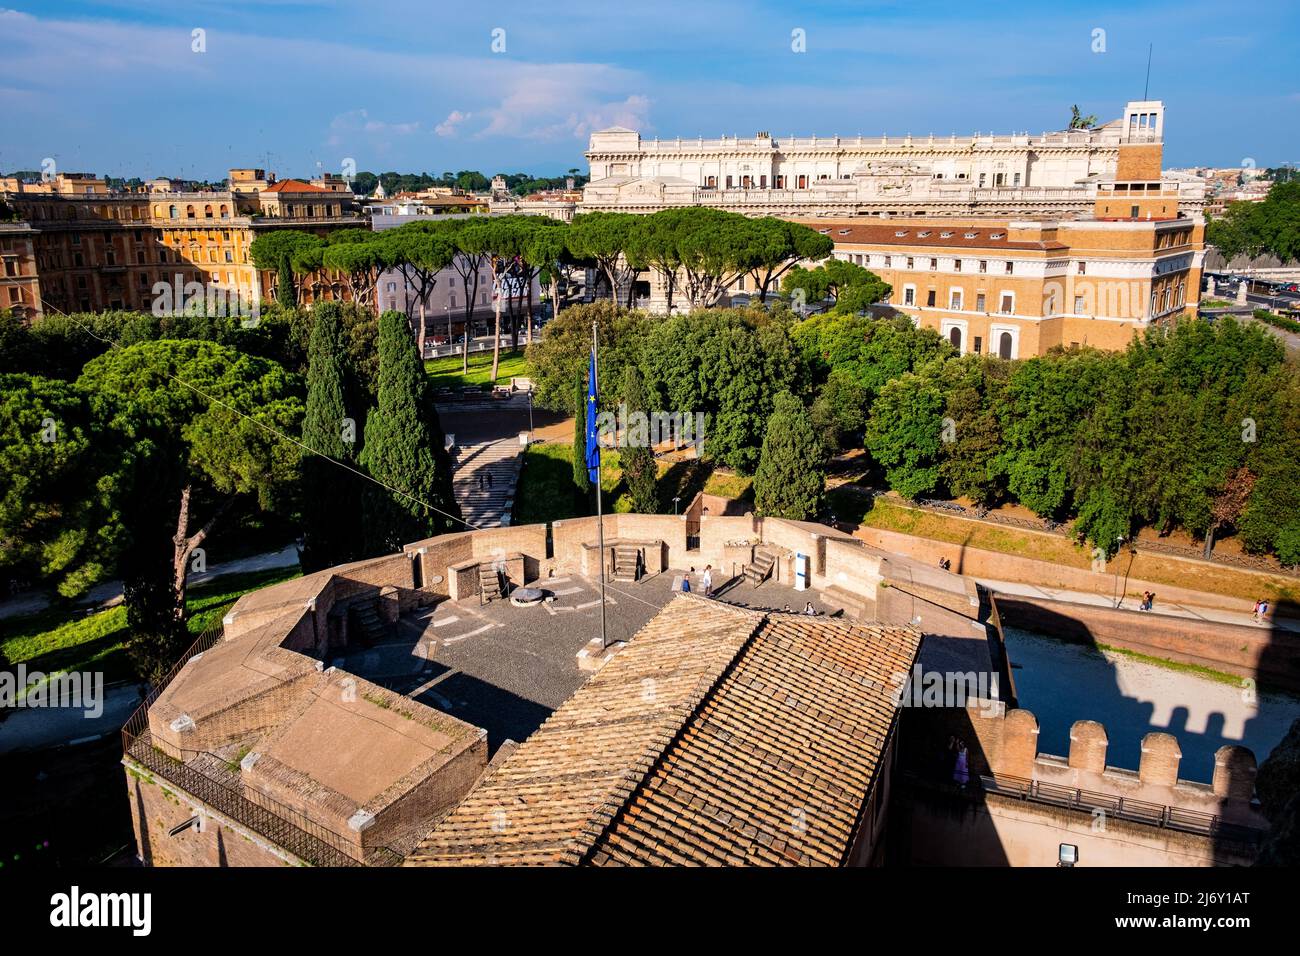 Rome, Italy - May 27, 2018: Bastion San Luca flanks and walls of Castel Sant'Angelo mausoleum - Castle of the Holy Angel at Tiber river embankment in Stock Photo